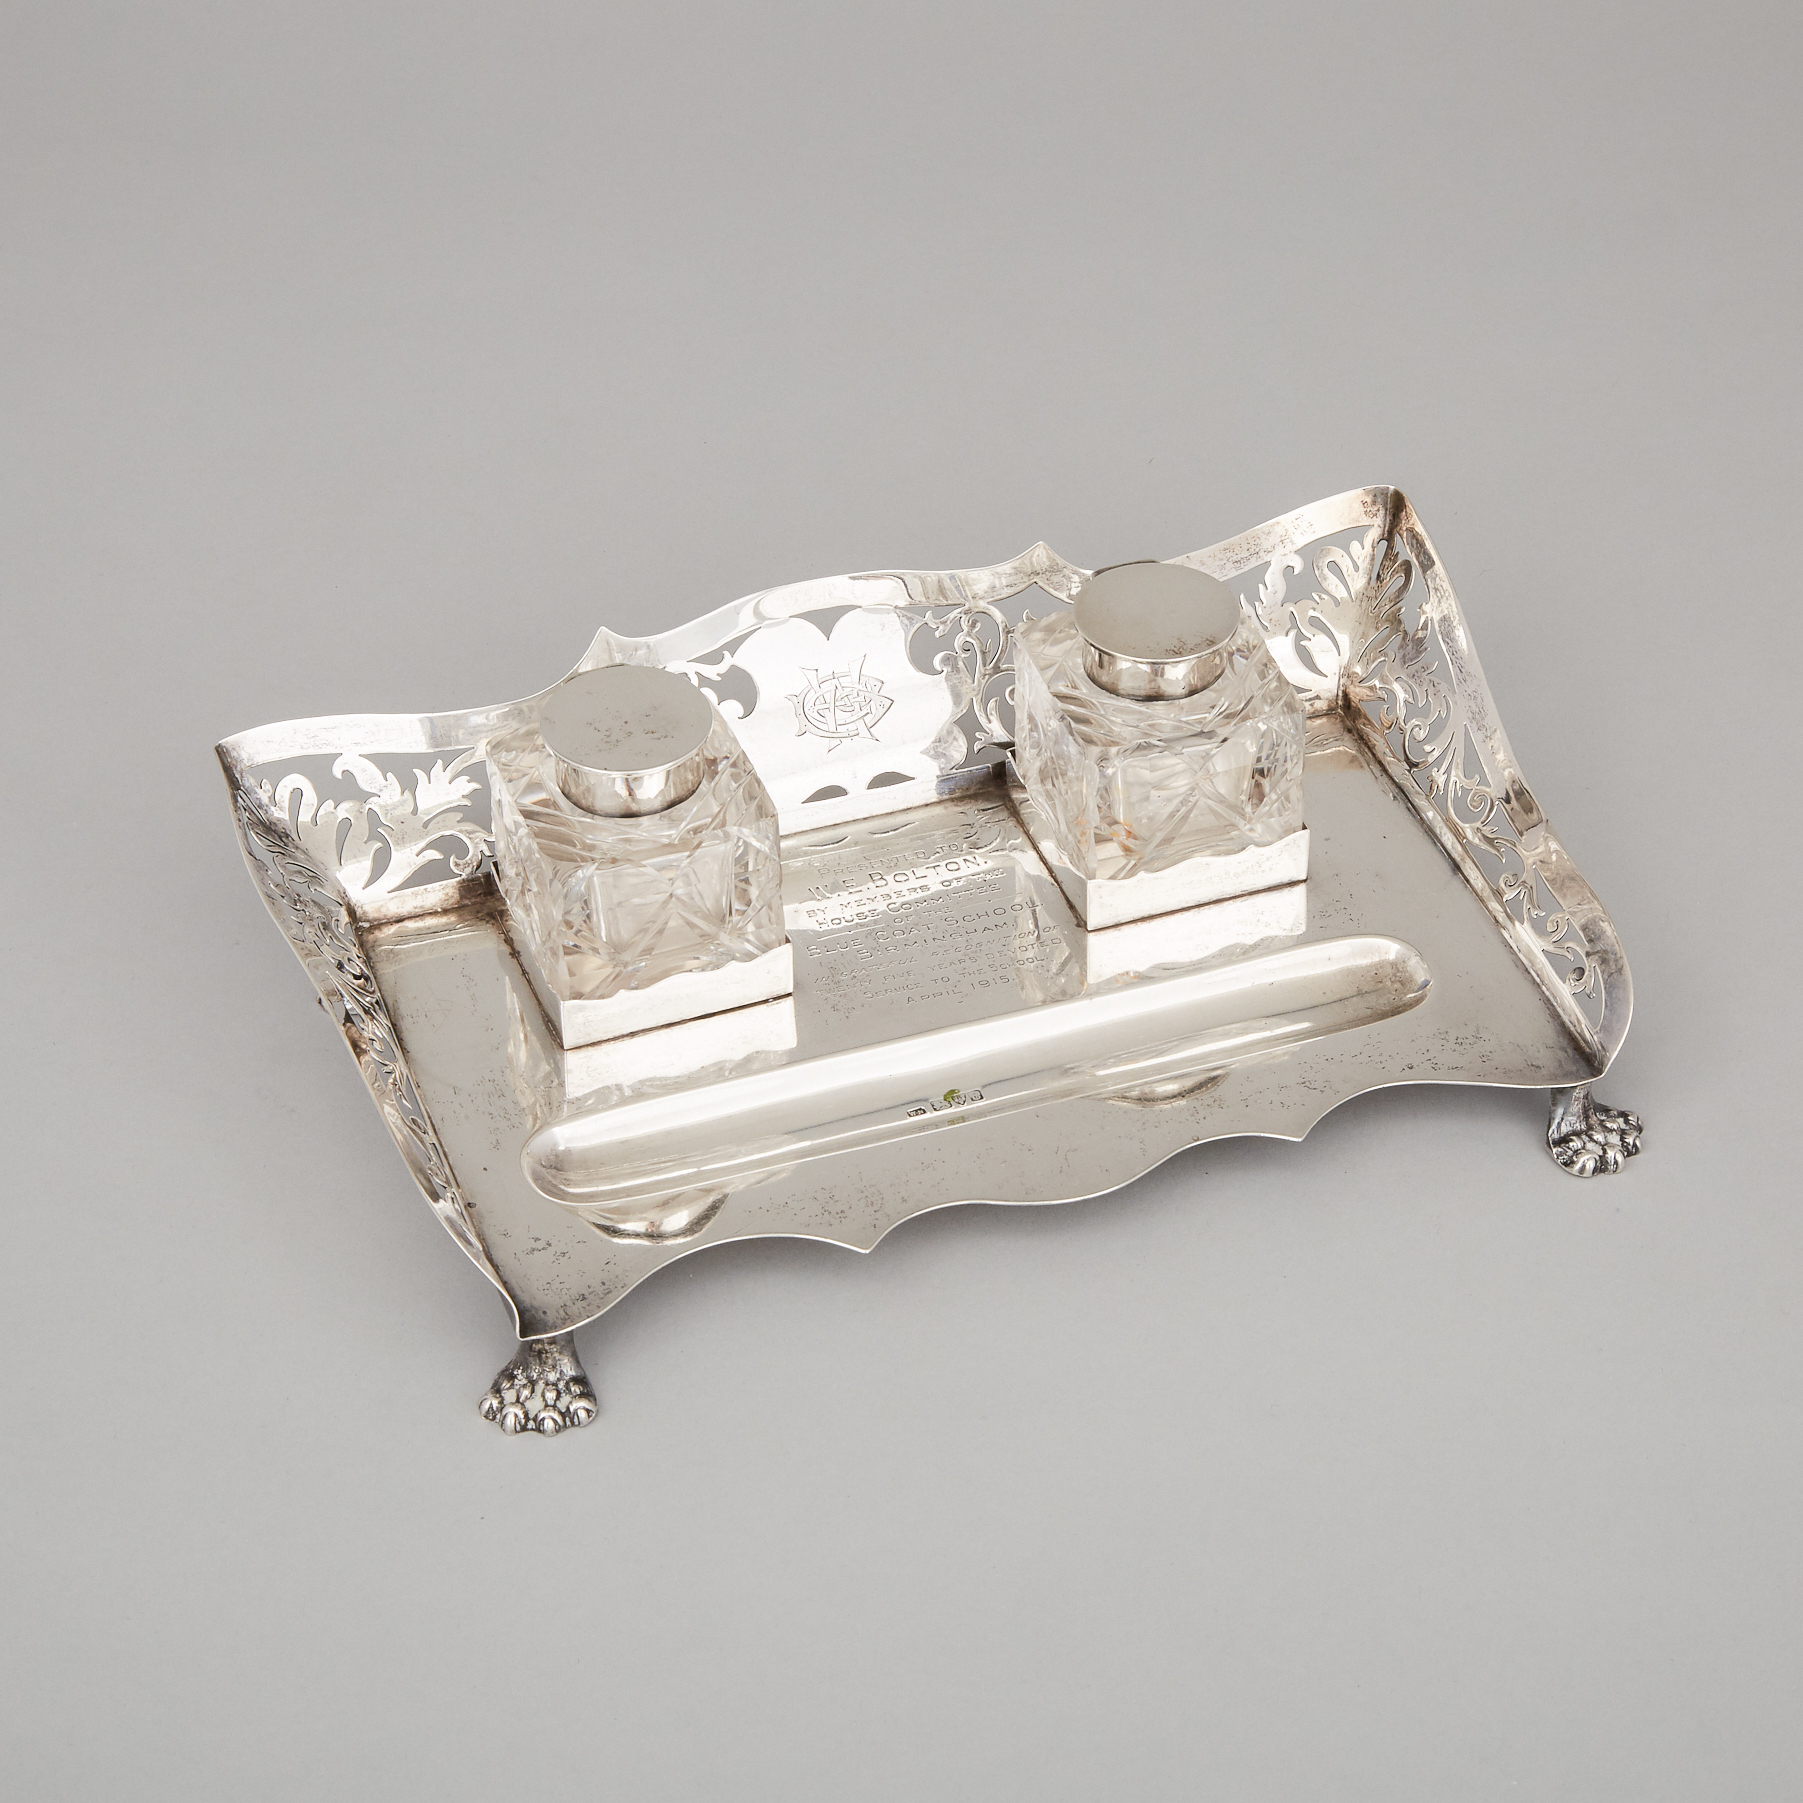 Edwardian Silver Inkstand, William Neale, Chester, 1905